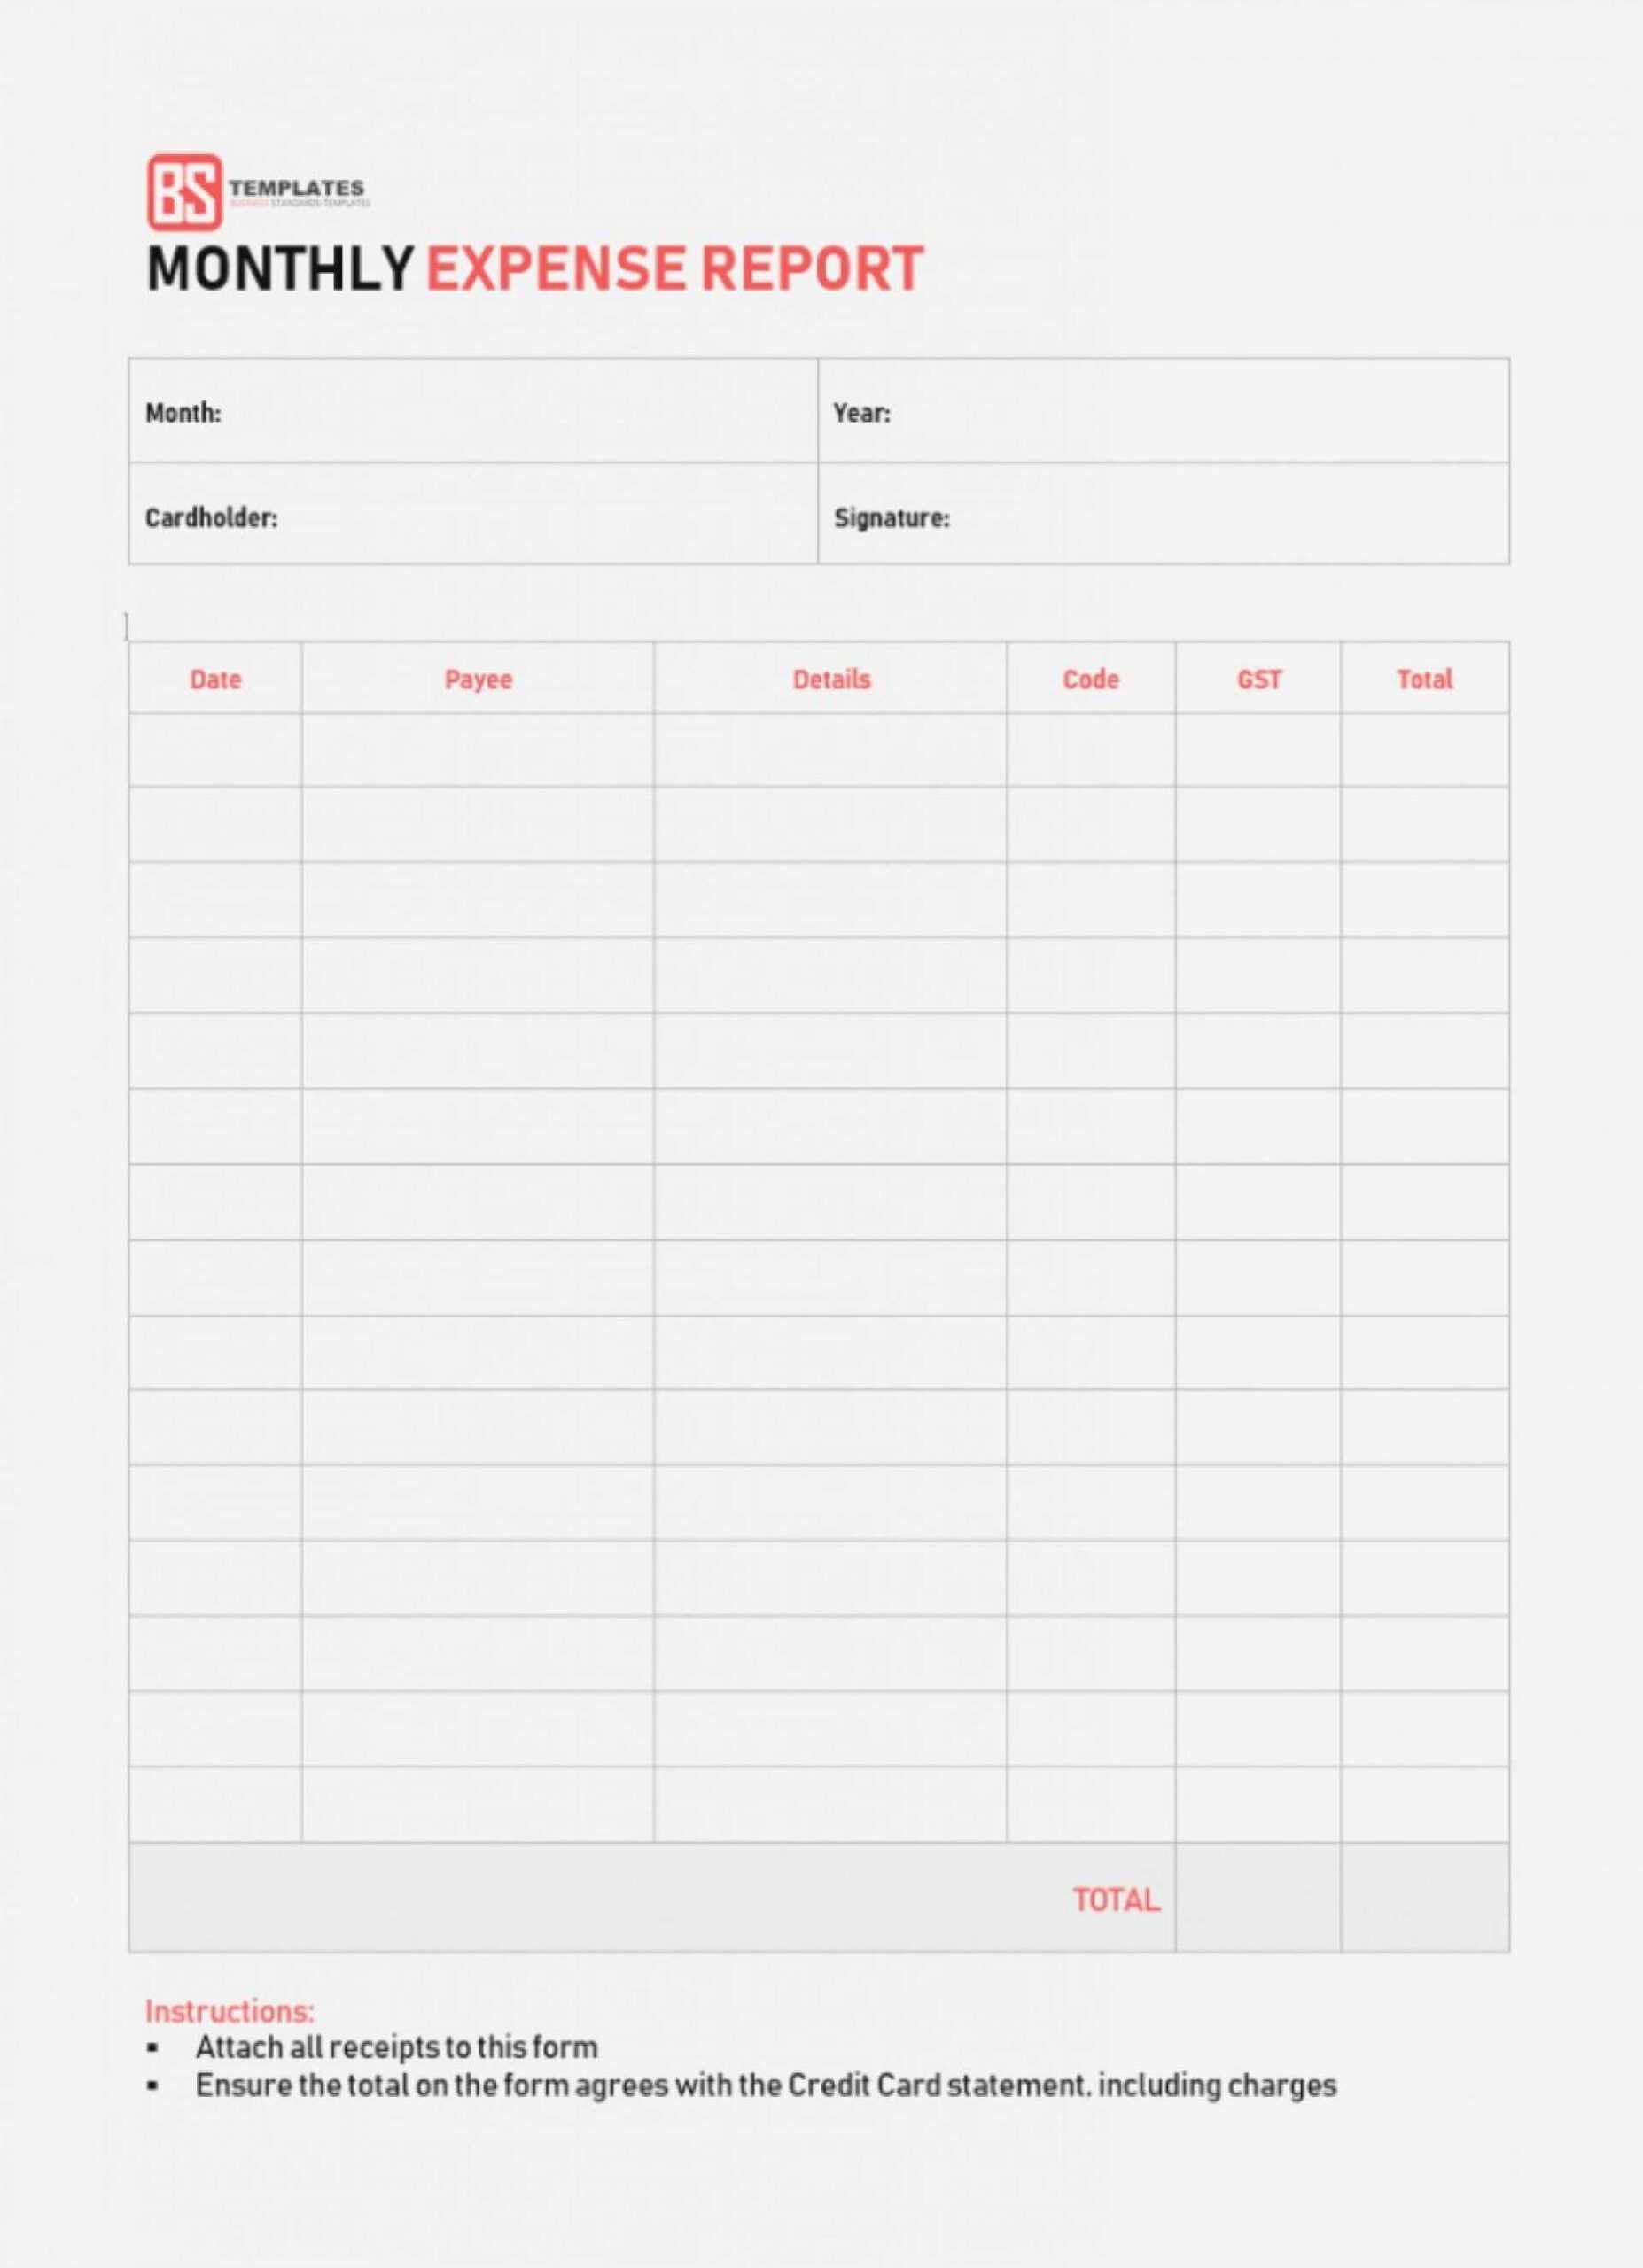 005 Excel Monthly Expense Report Template Frightening Ideas Within Expense Report Spreadsheet Template